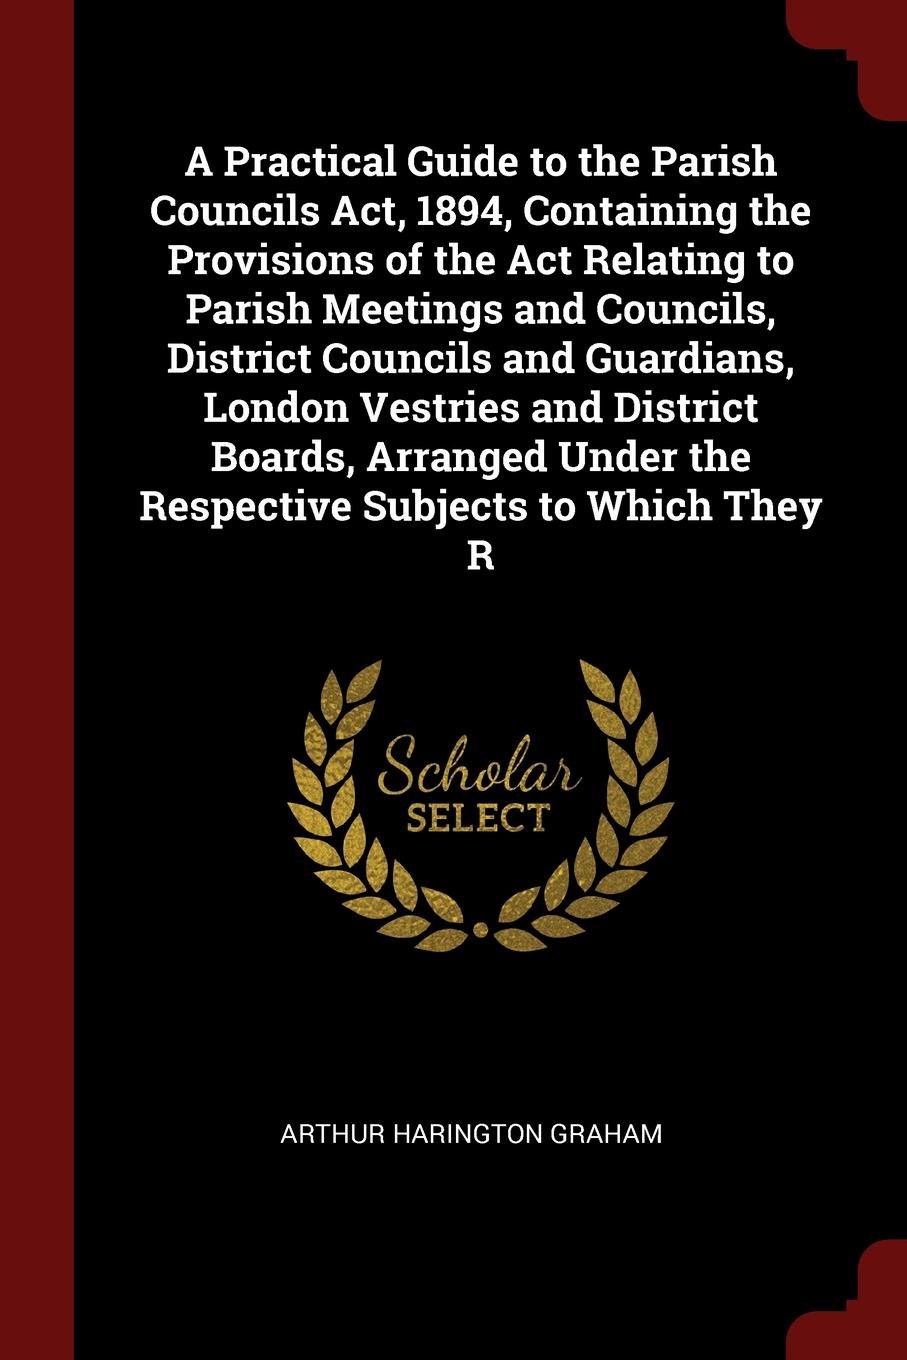 A Practical Guide to the Parish Councils Act, 1894, Containing the Provisions of the Act Relating to Parish Meetings and Councils, District Councils and Guardians, London Vestries and District Boards, Arranged Under the Respective Subjects to Whic...